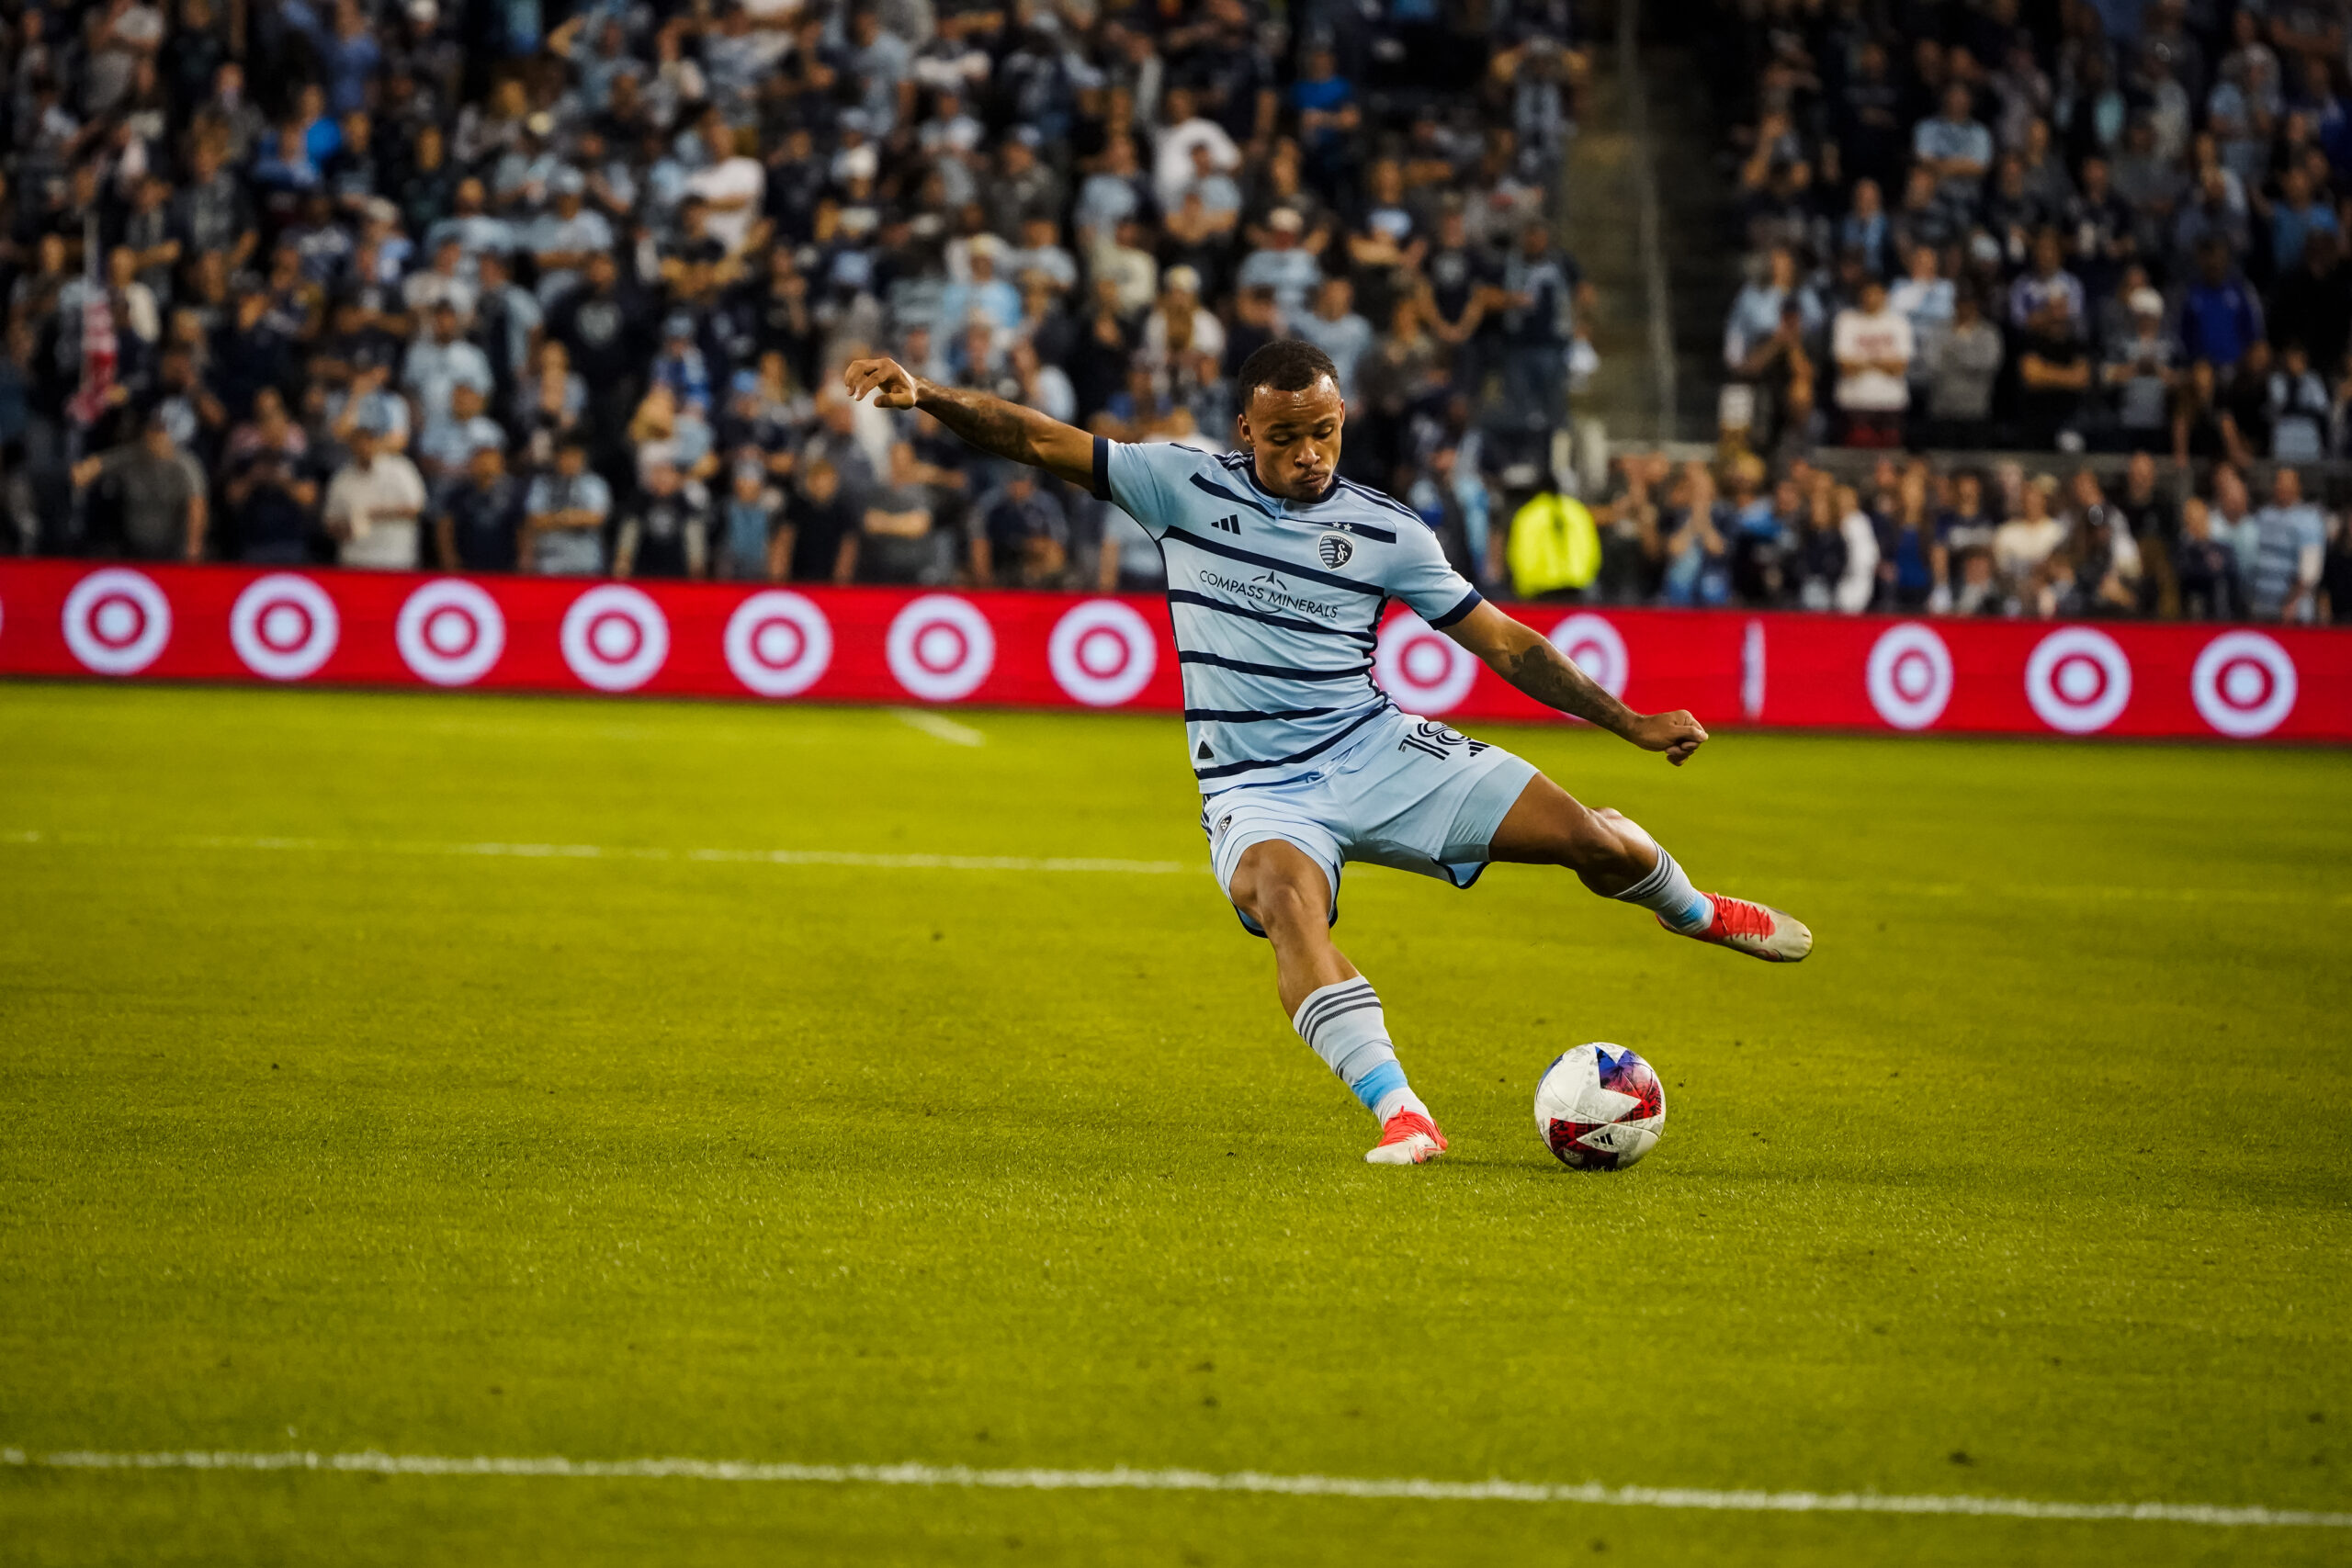 Sporting KC defender Logan Ndenbe against St. Louis City SC in the MLS Cup Playoffs